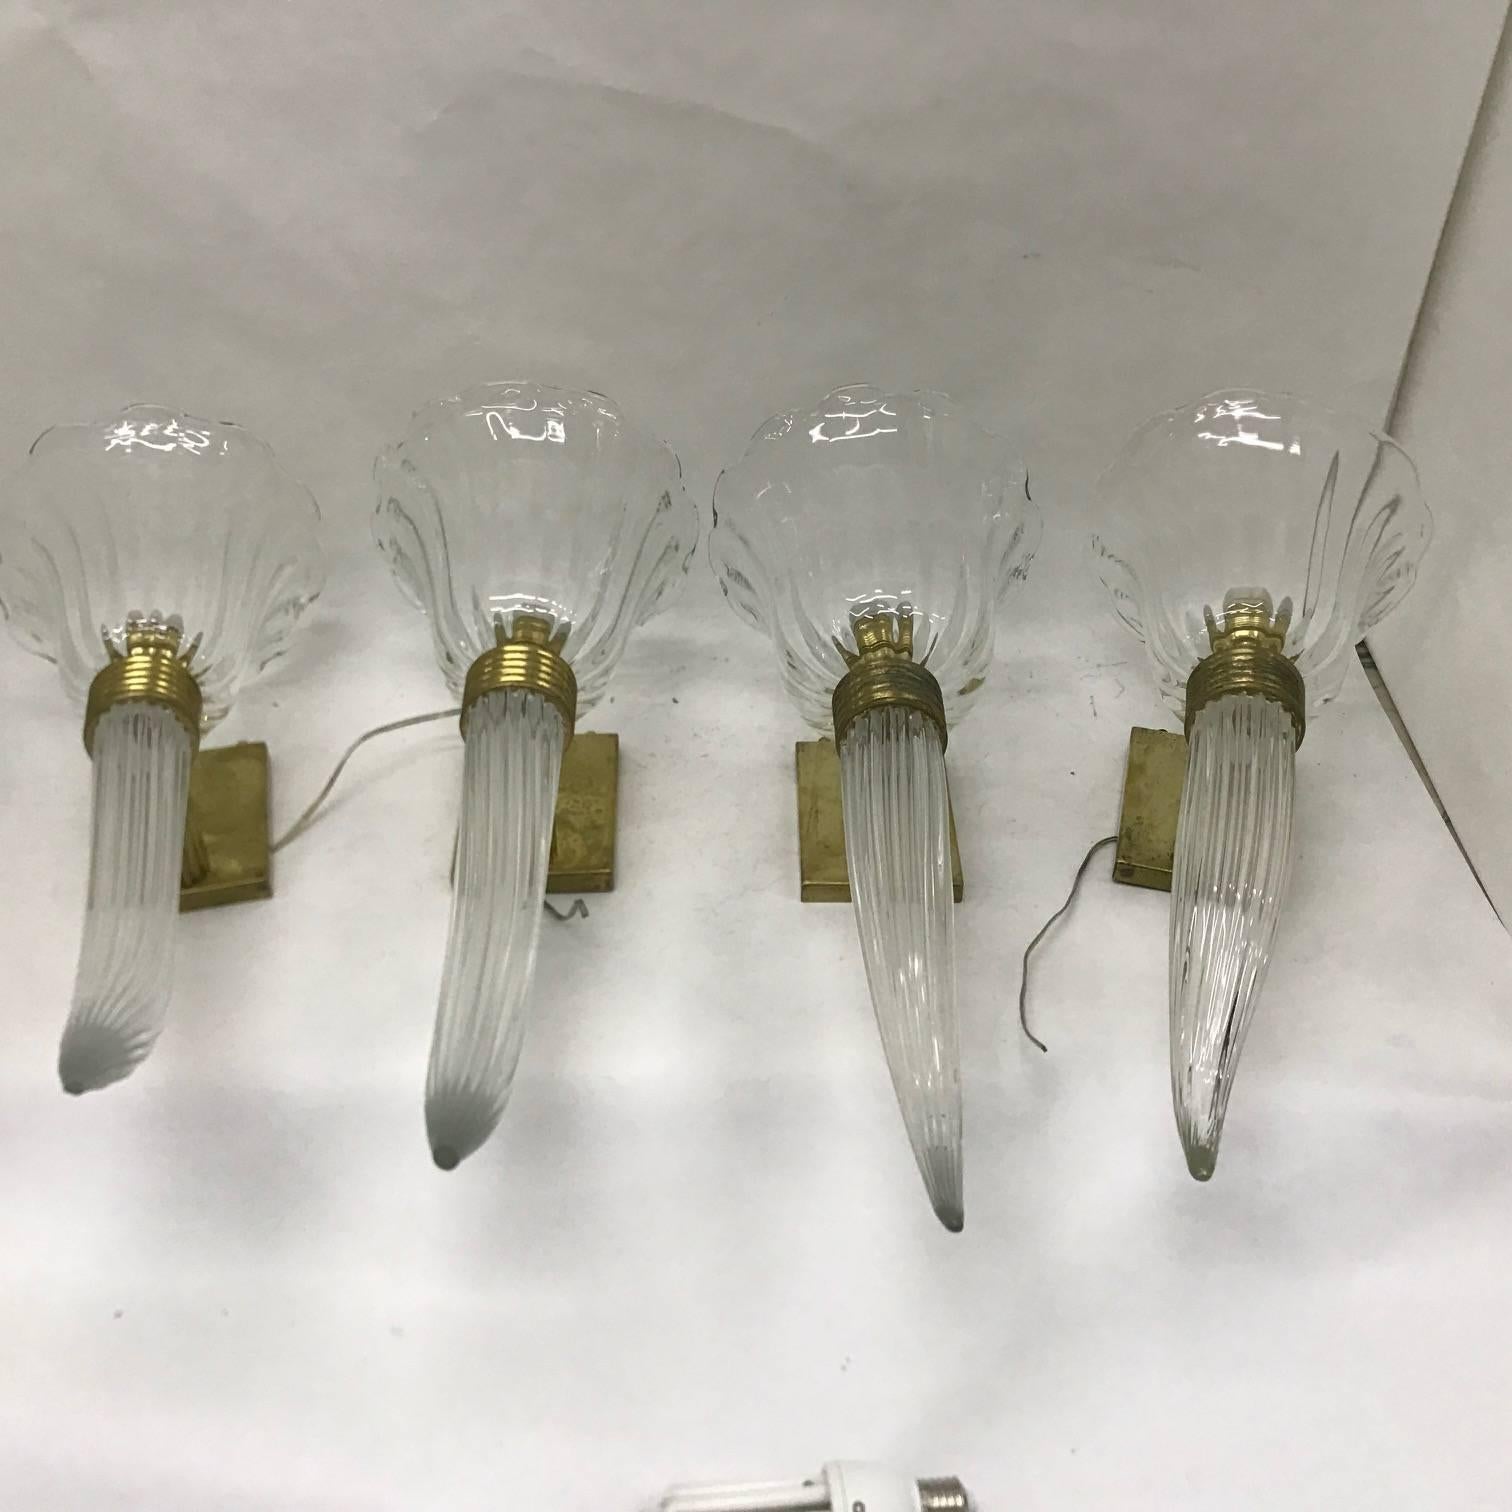 Four Murano glass and brass sconces, made in Italy in the 1960s, good conditions overall.